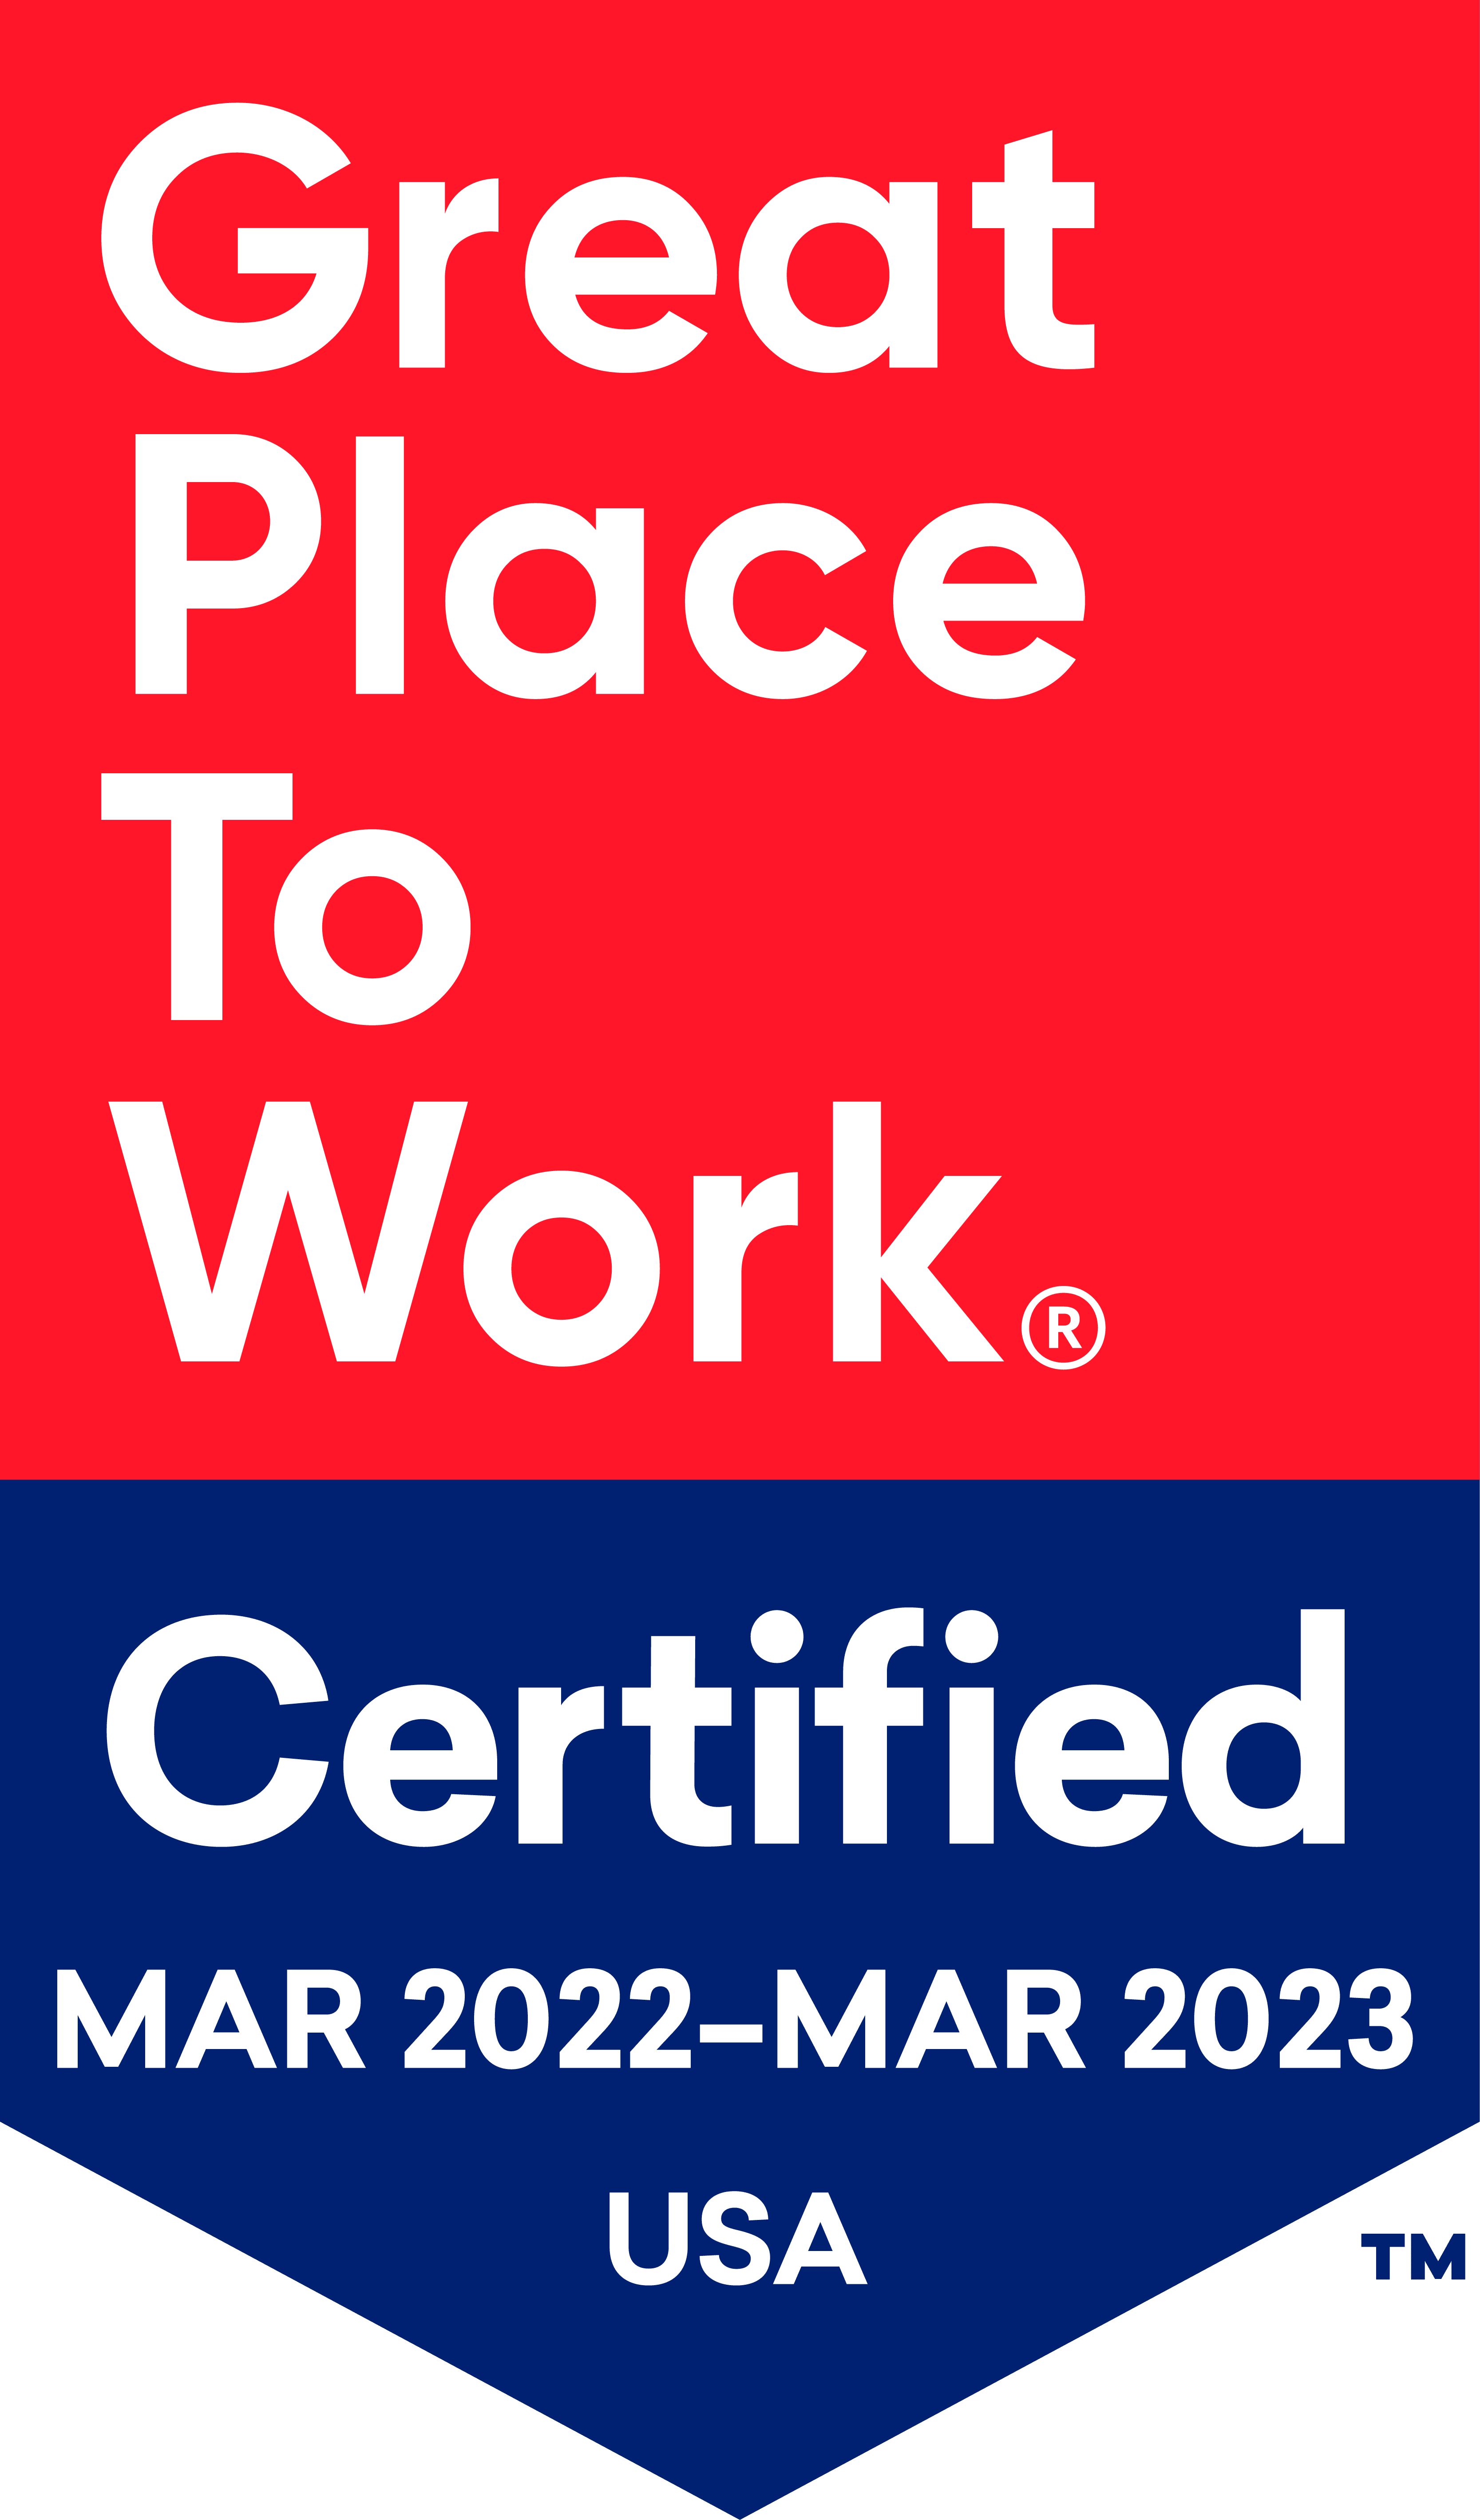 Great place to work badge for Keystone Place at Magnolia Commons